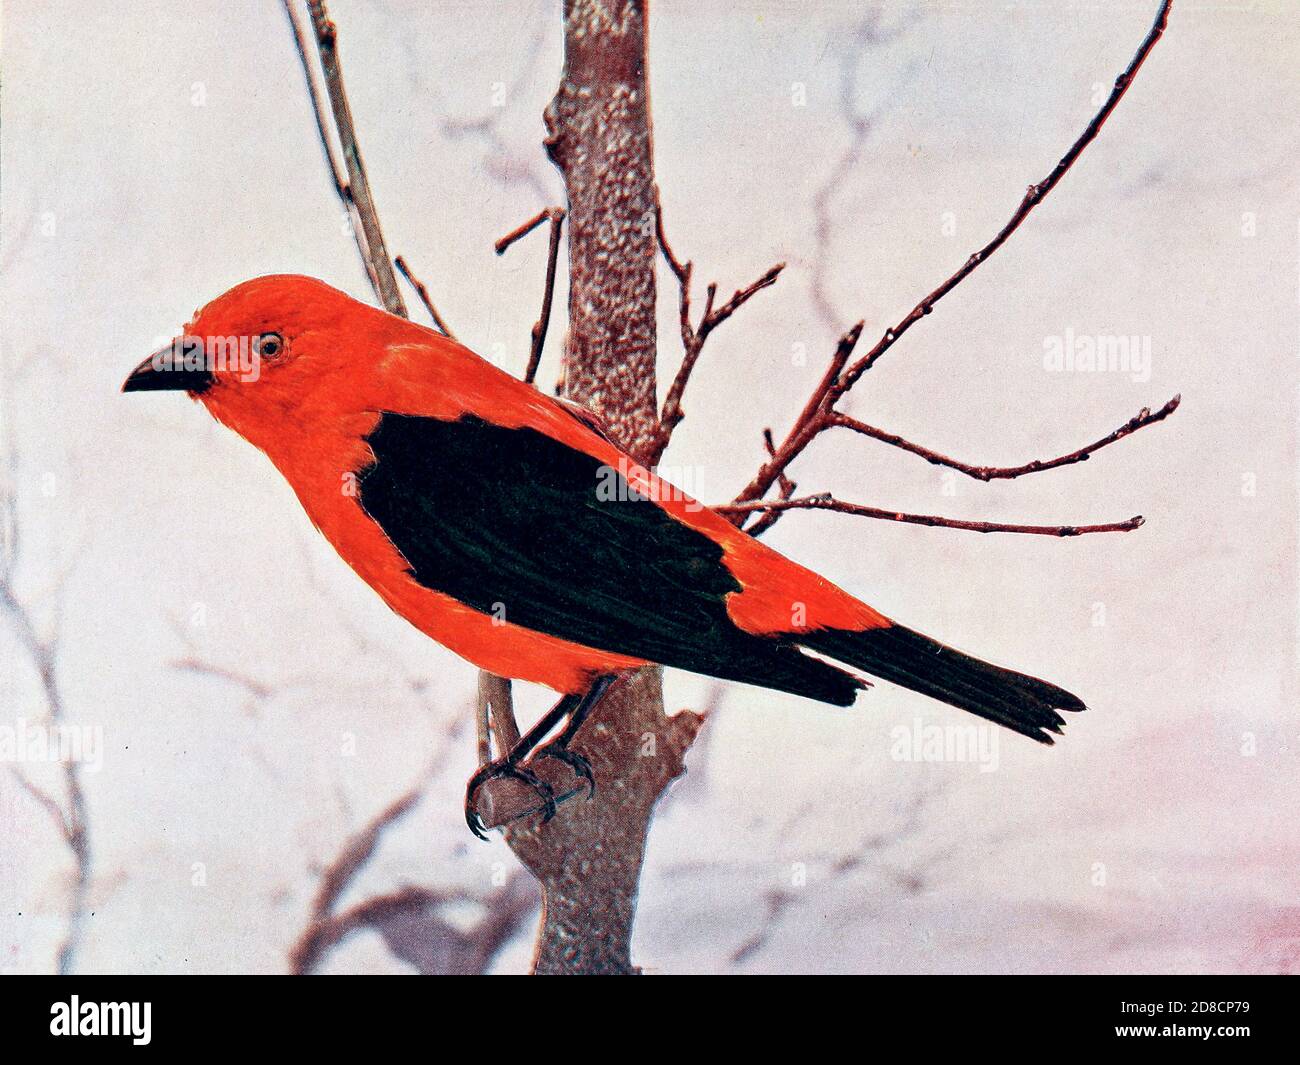 The scarlet tanager (Piranga olivacea syn Piranga erythromelas) is a medium-sized American songbird. From Birds : illustrated by color photography : a monthly serial. Knowledge of Bird-life Vol 1 No 1 June 1897 Stock Photo